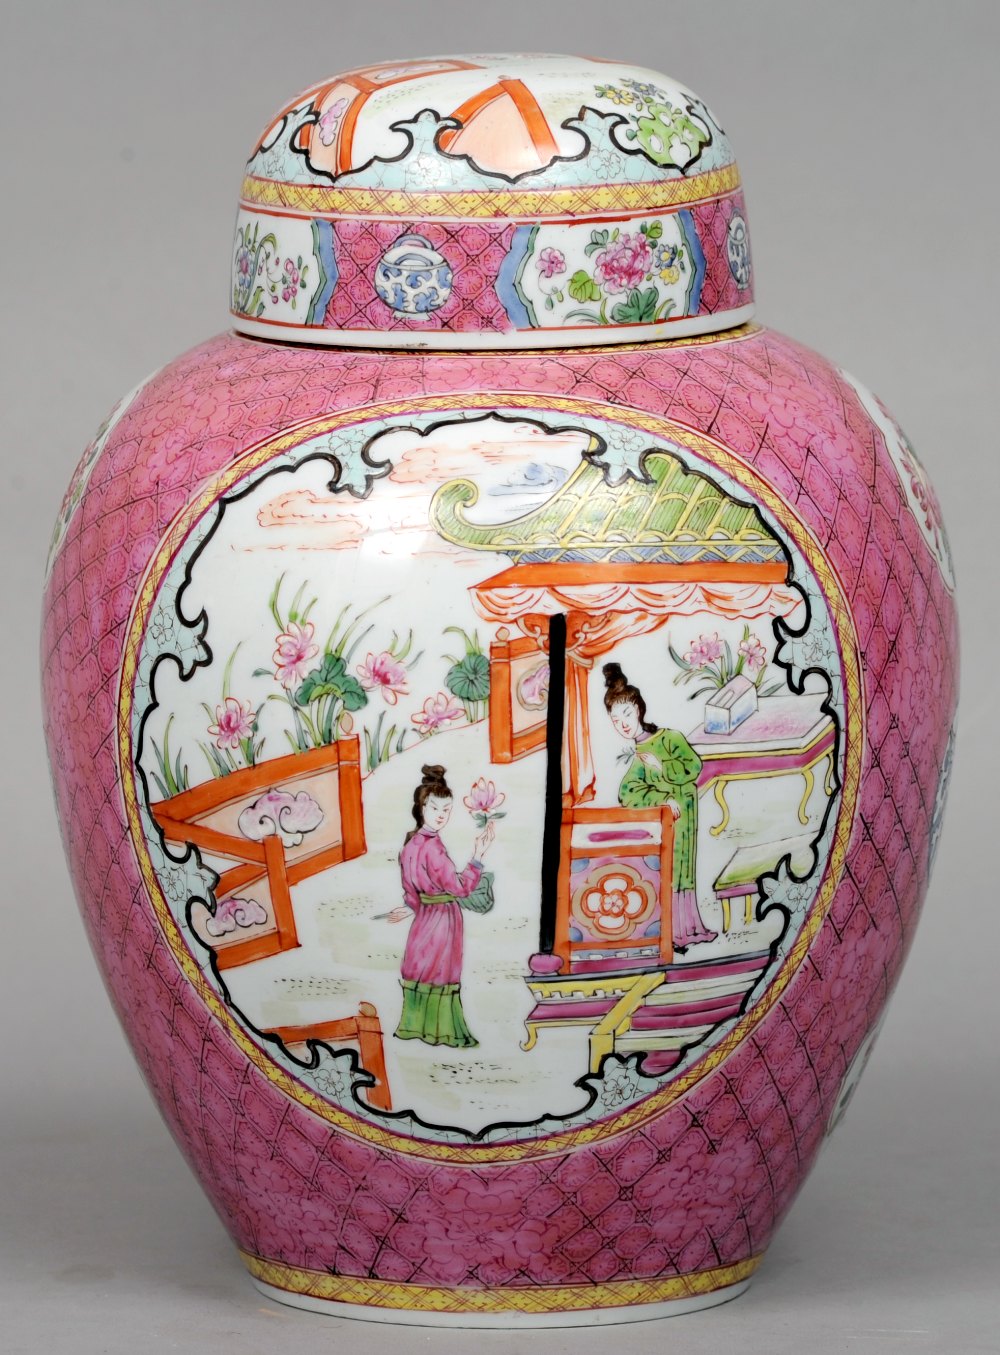 A Sampson porcelain ginger jar and cover
The pink ground decorated with twin figural vignettes and